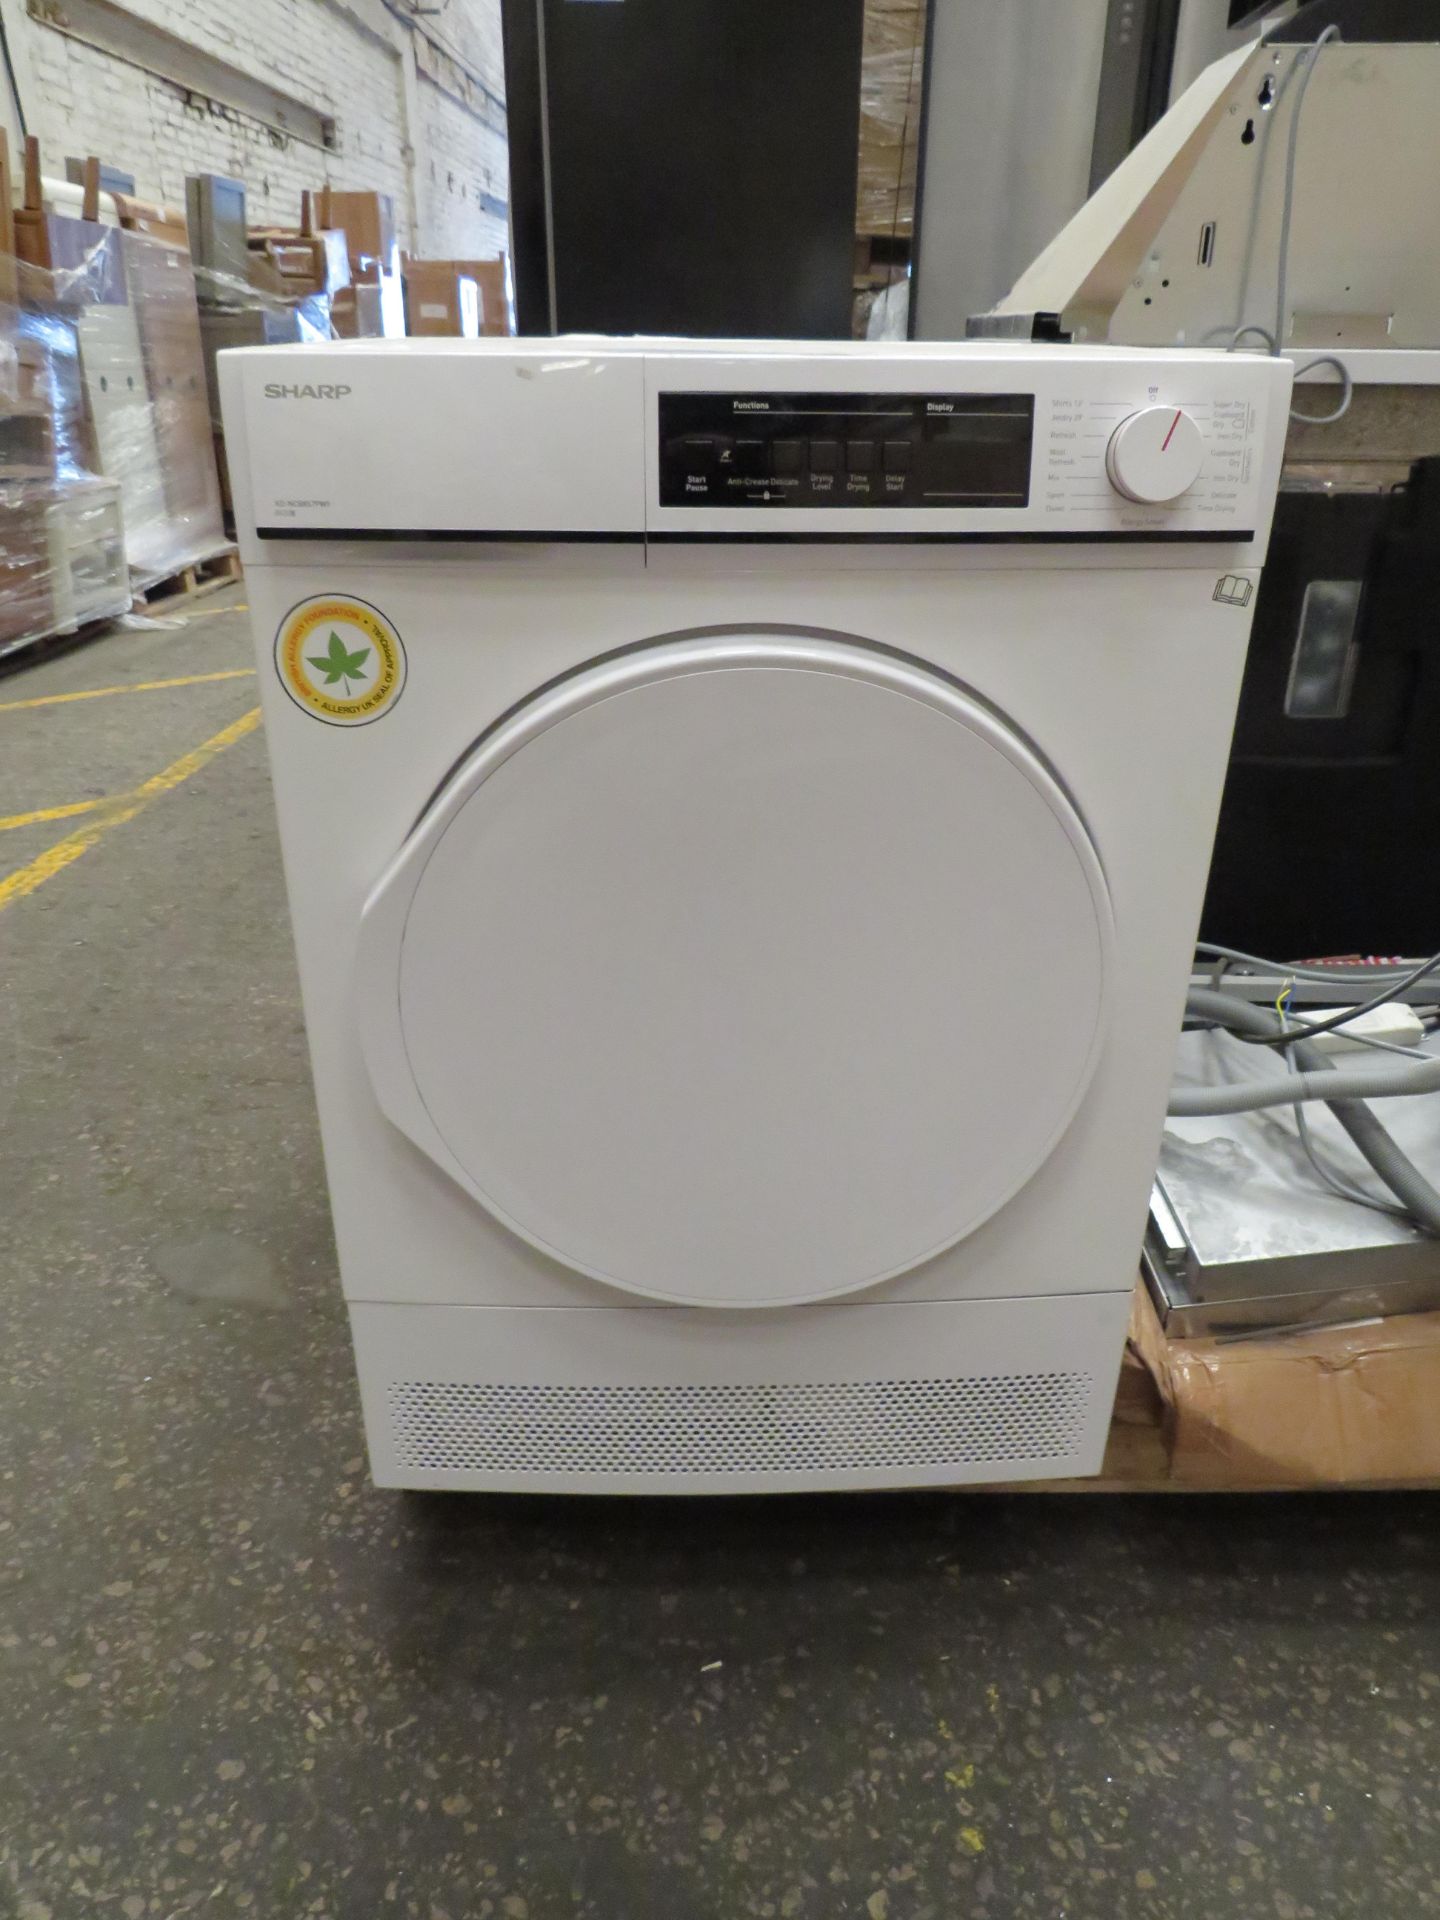 Sharp - KD-NCB8S7PW9 White 8KG Tumble Dryer - Powers On, Unchecked For Heat, Slight Marks Present.